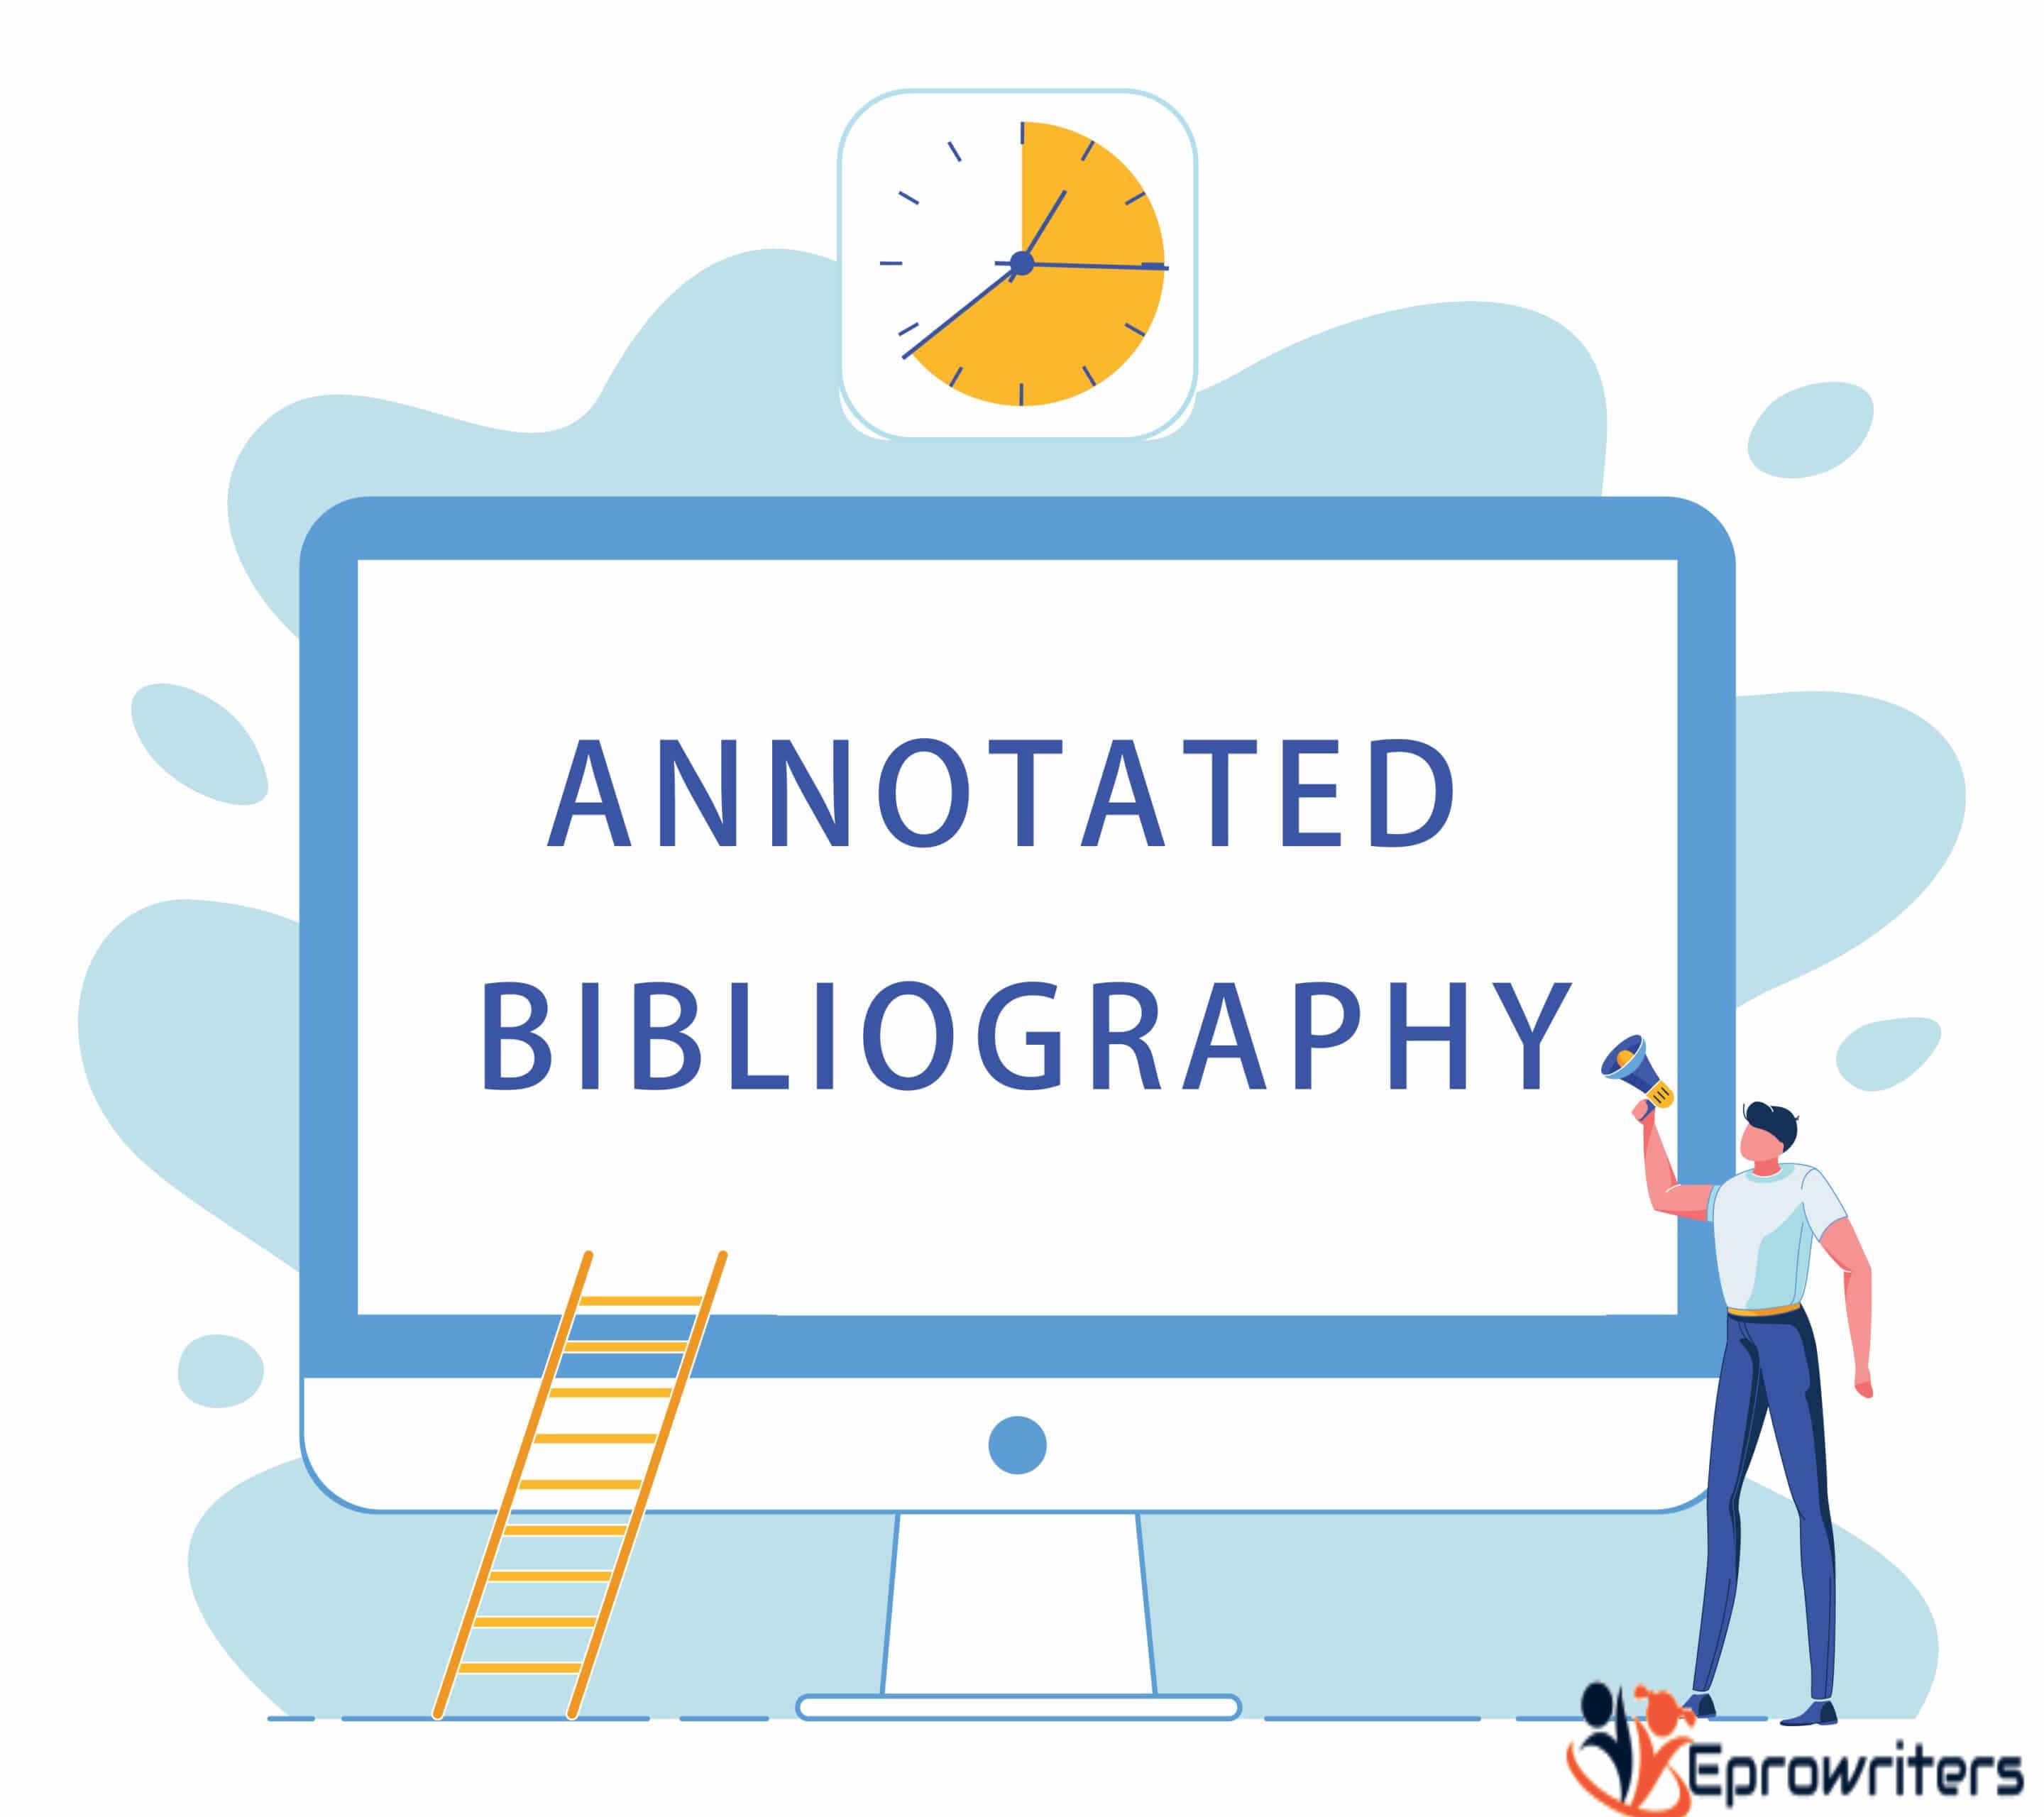 NURS389 Annotated Bibliography